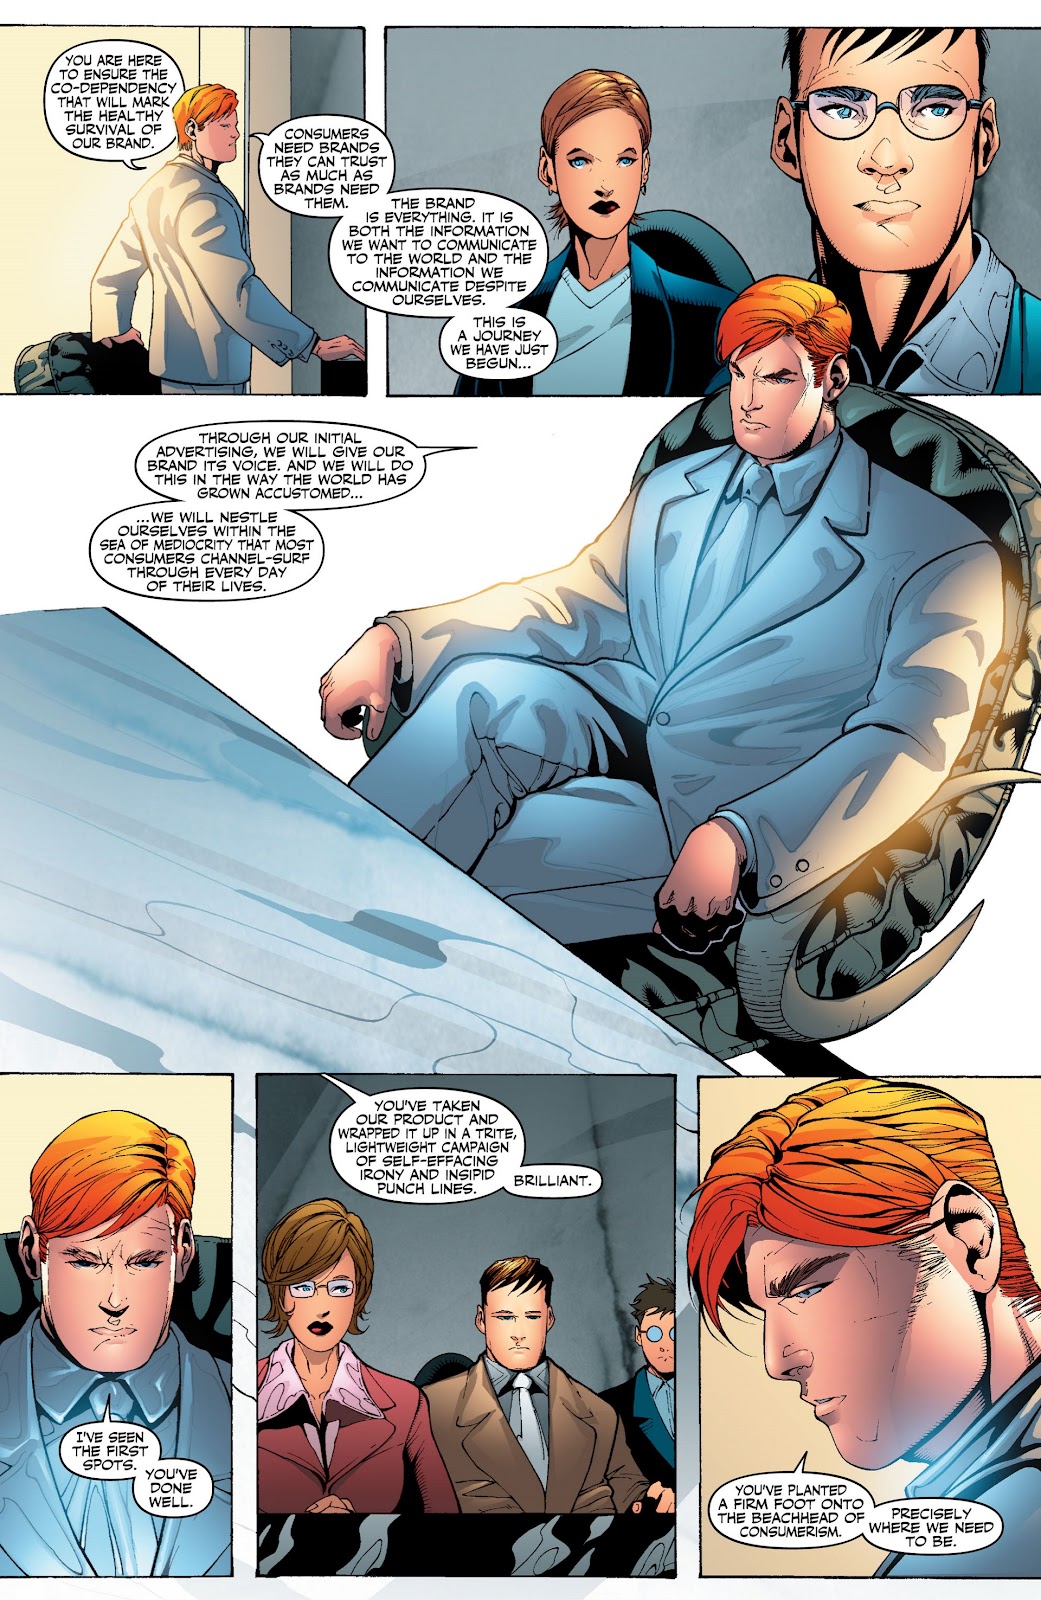 Wildcats Version 3.0 Issue #1 #1 - English 10